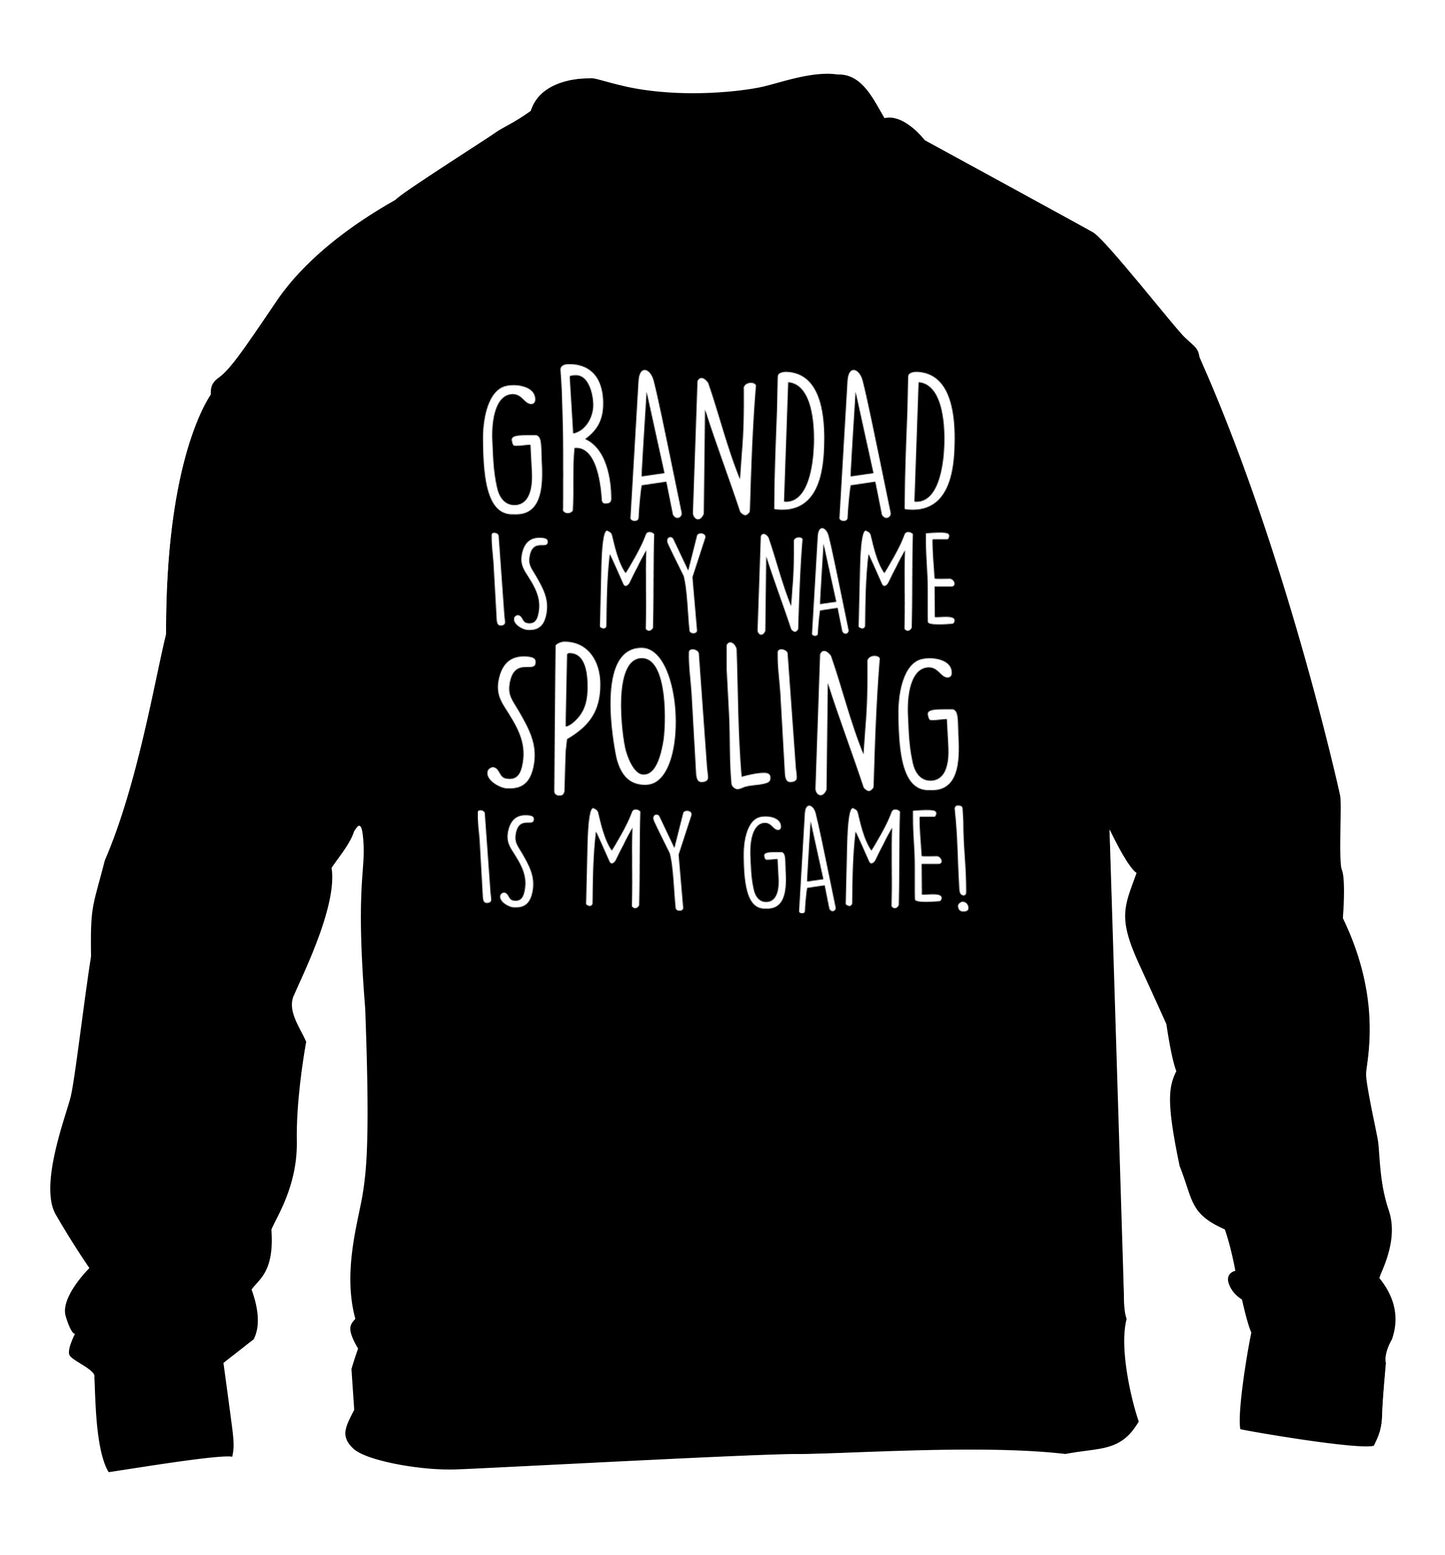 Grandad is my name, spoiling is my game children's black sweater 12-14 Years